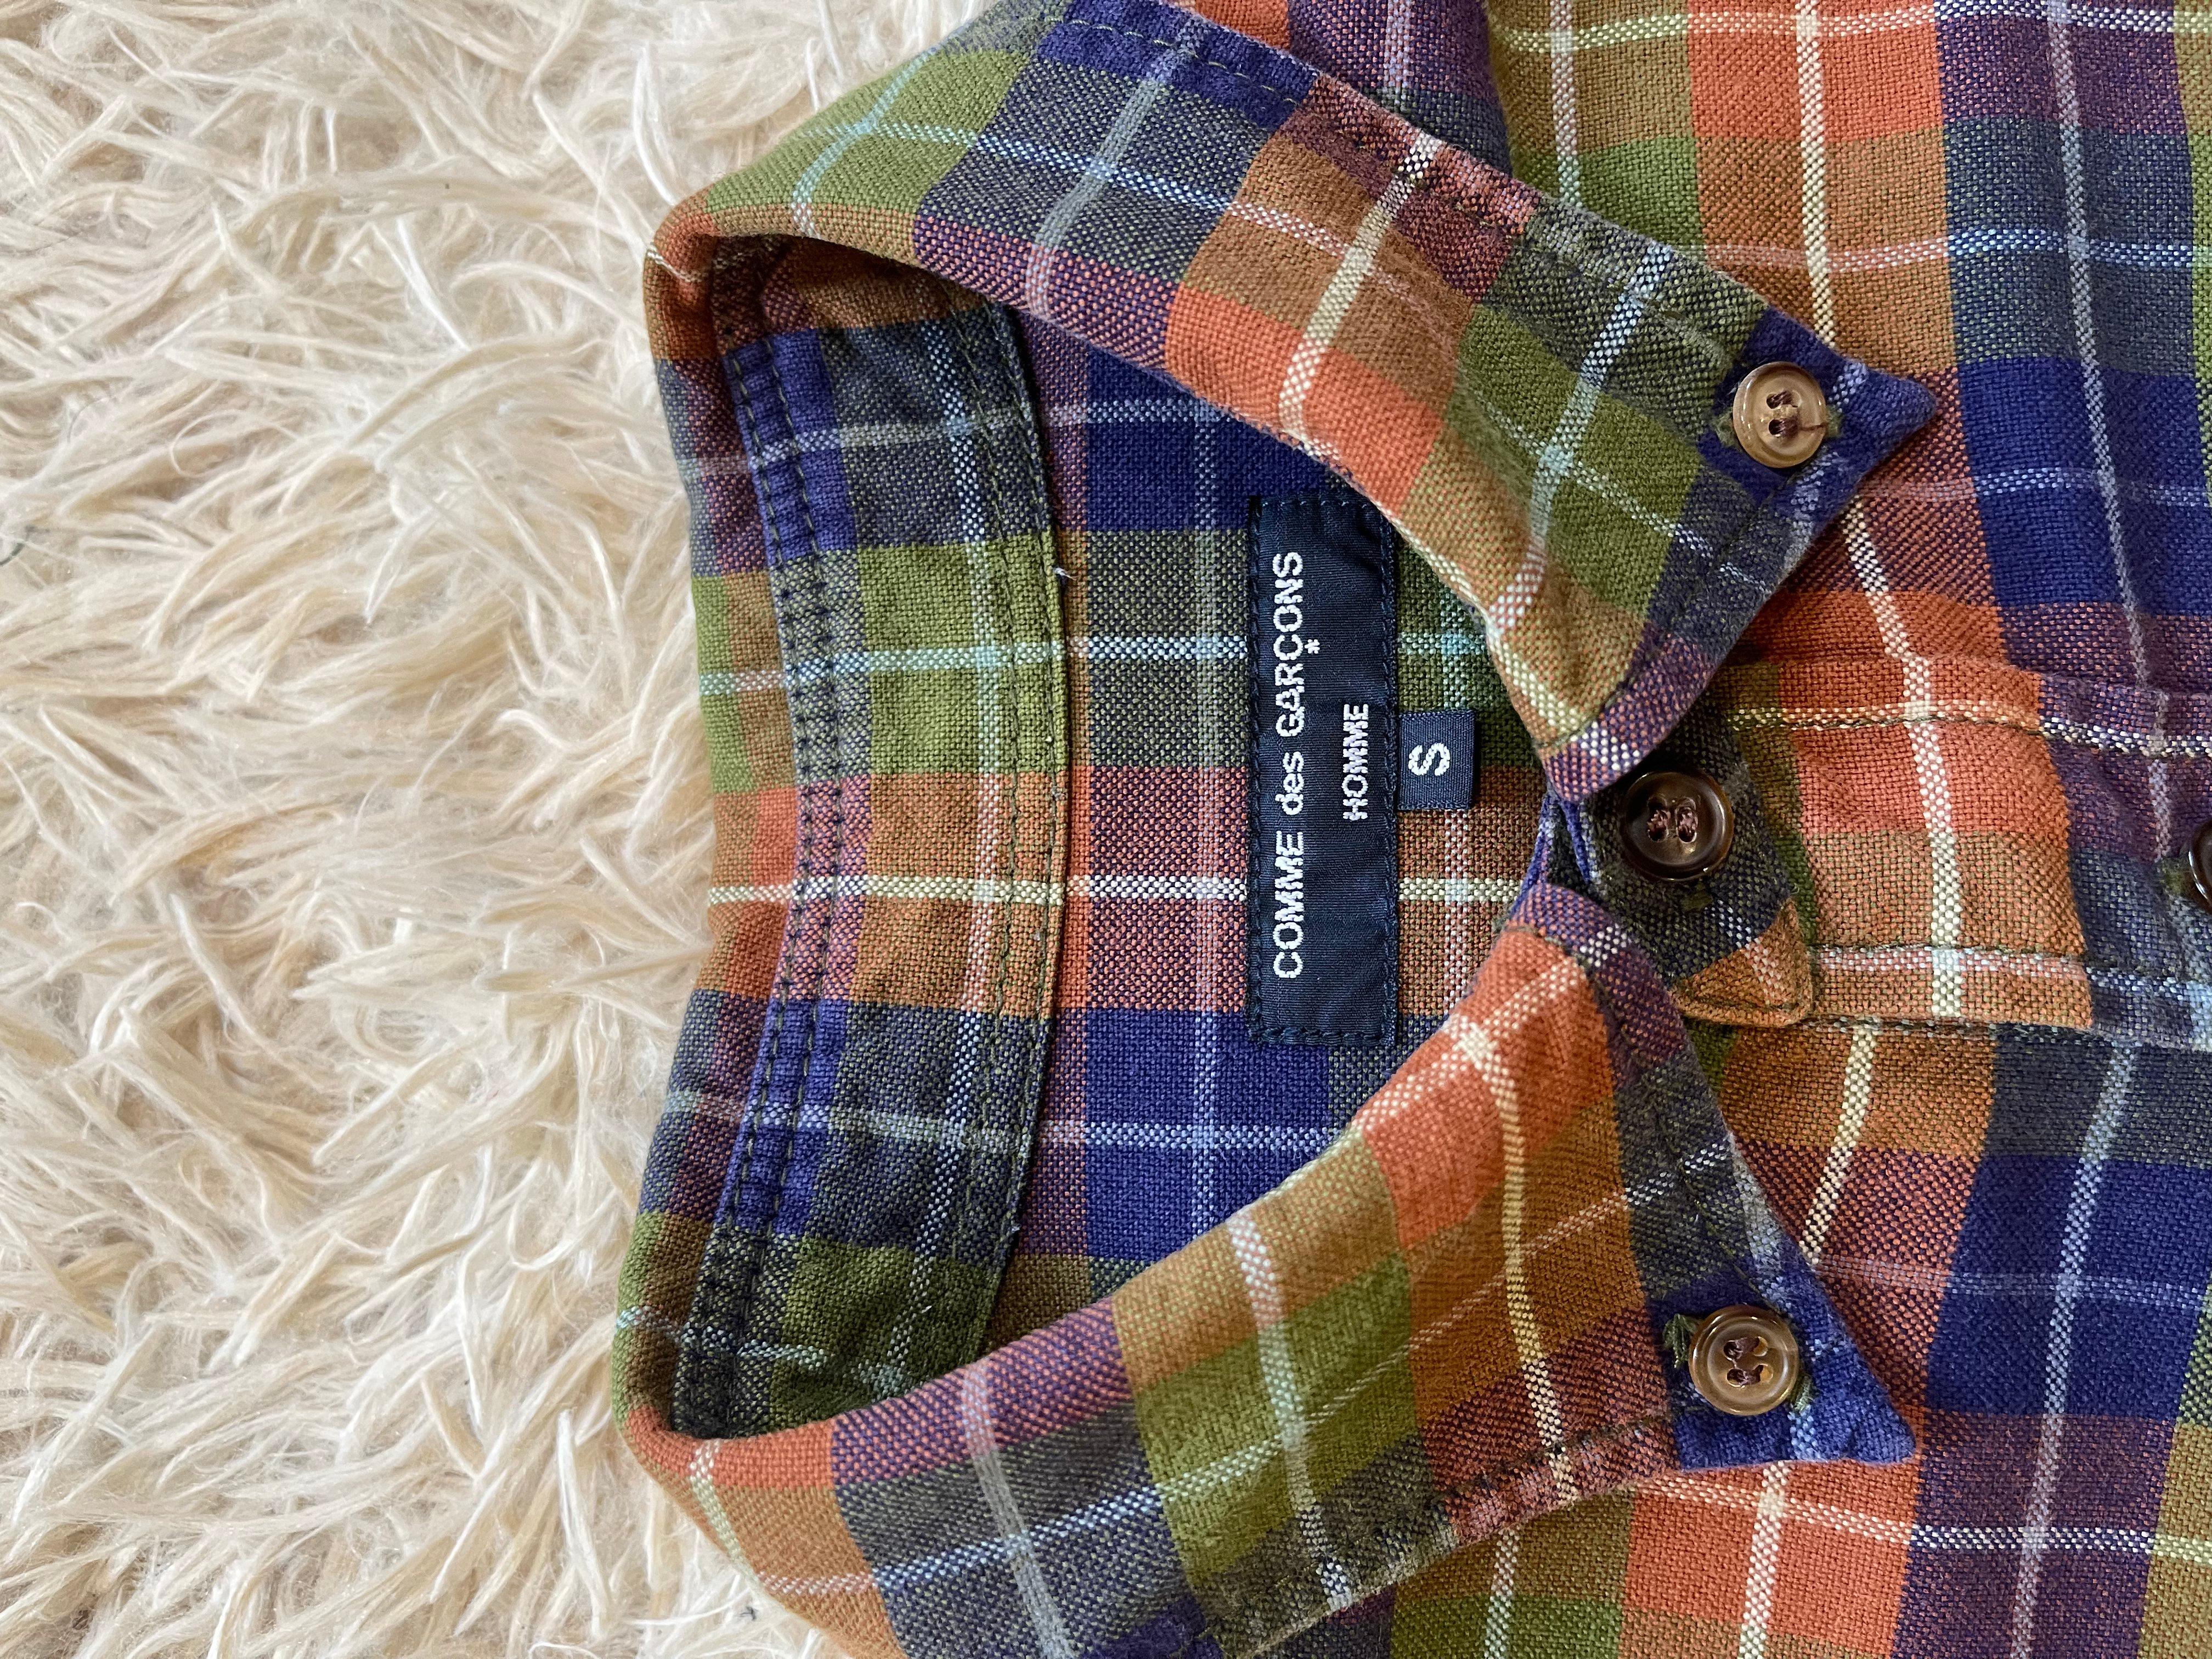 Comme Des Garcons HOMME S/S2016 Plaid Shirt In Excellent Condition For Sale In Seattle, WA